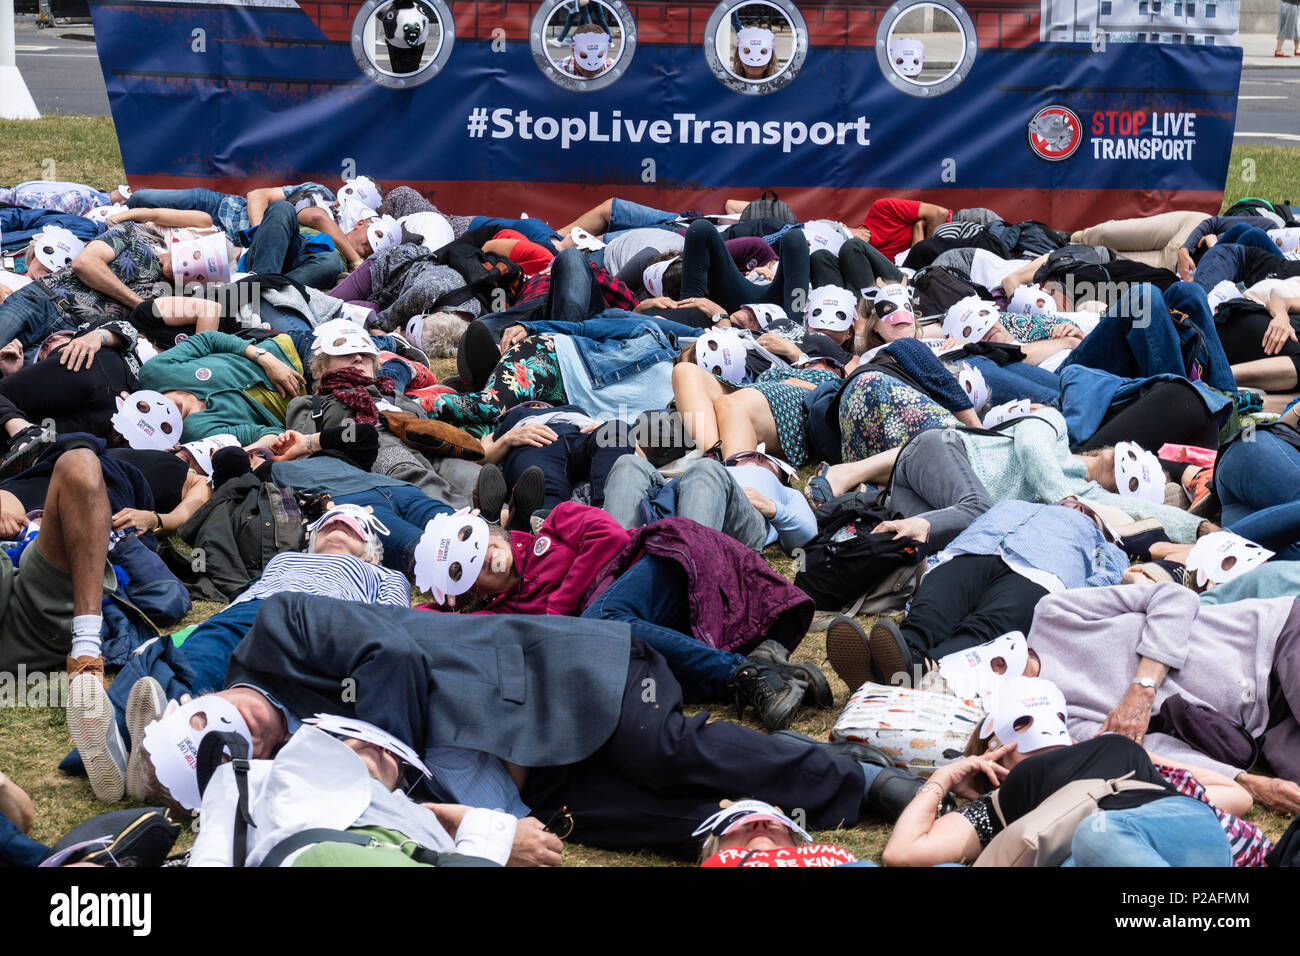 London 14th June 2018, End live animal transport protest on Parliament Square, London a die in by activists, Credit Ian Davidson/Alamy Live News Stock Photo